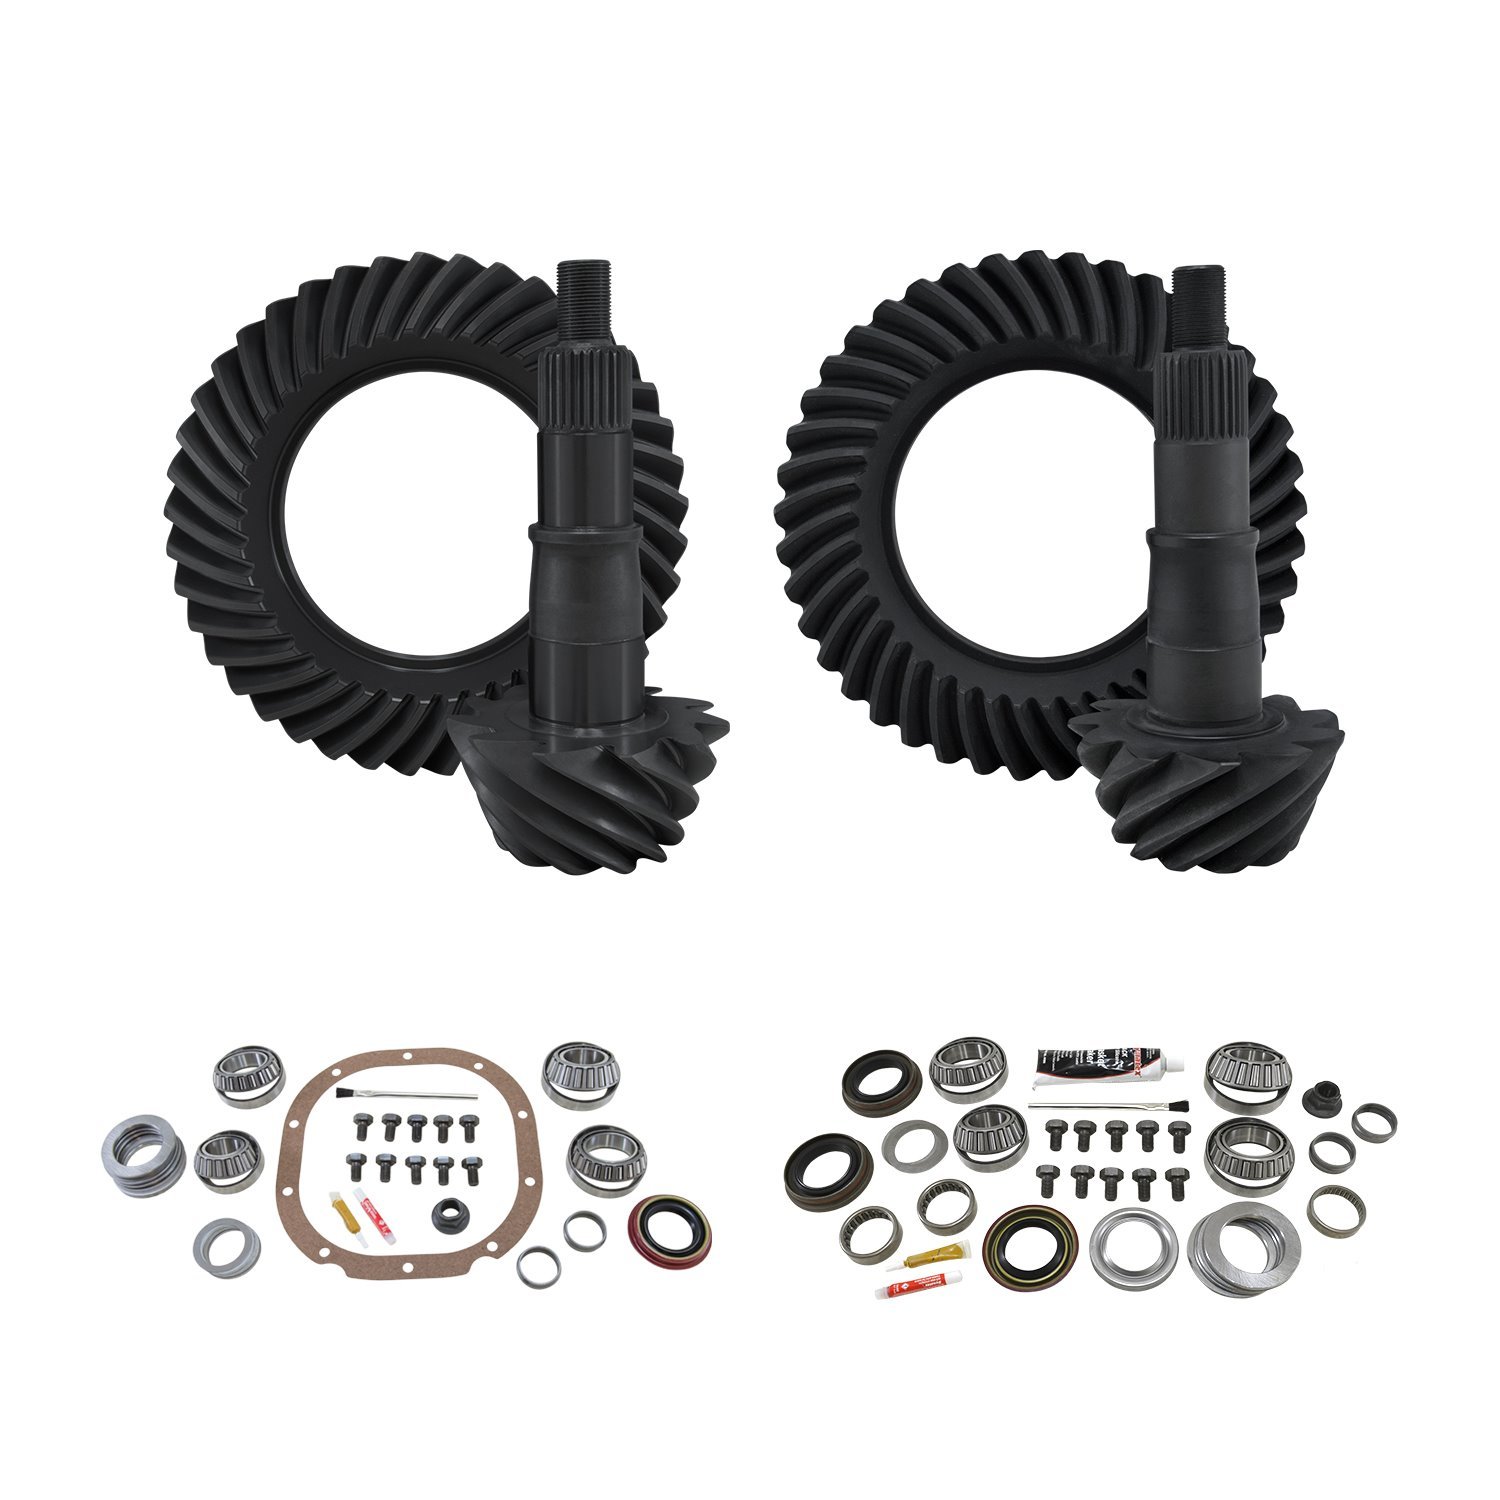 Re-Gear & Installation Kit, Ford 8.8 in., 2000-2008 F150, 4.88 Ratio, Fr&Rr